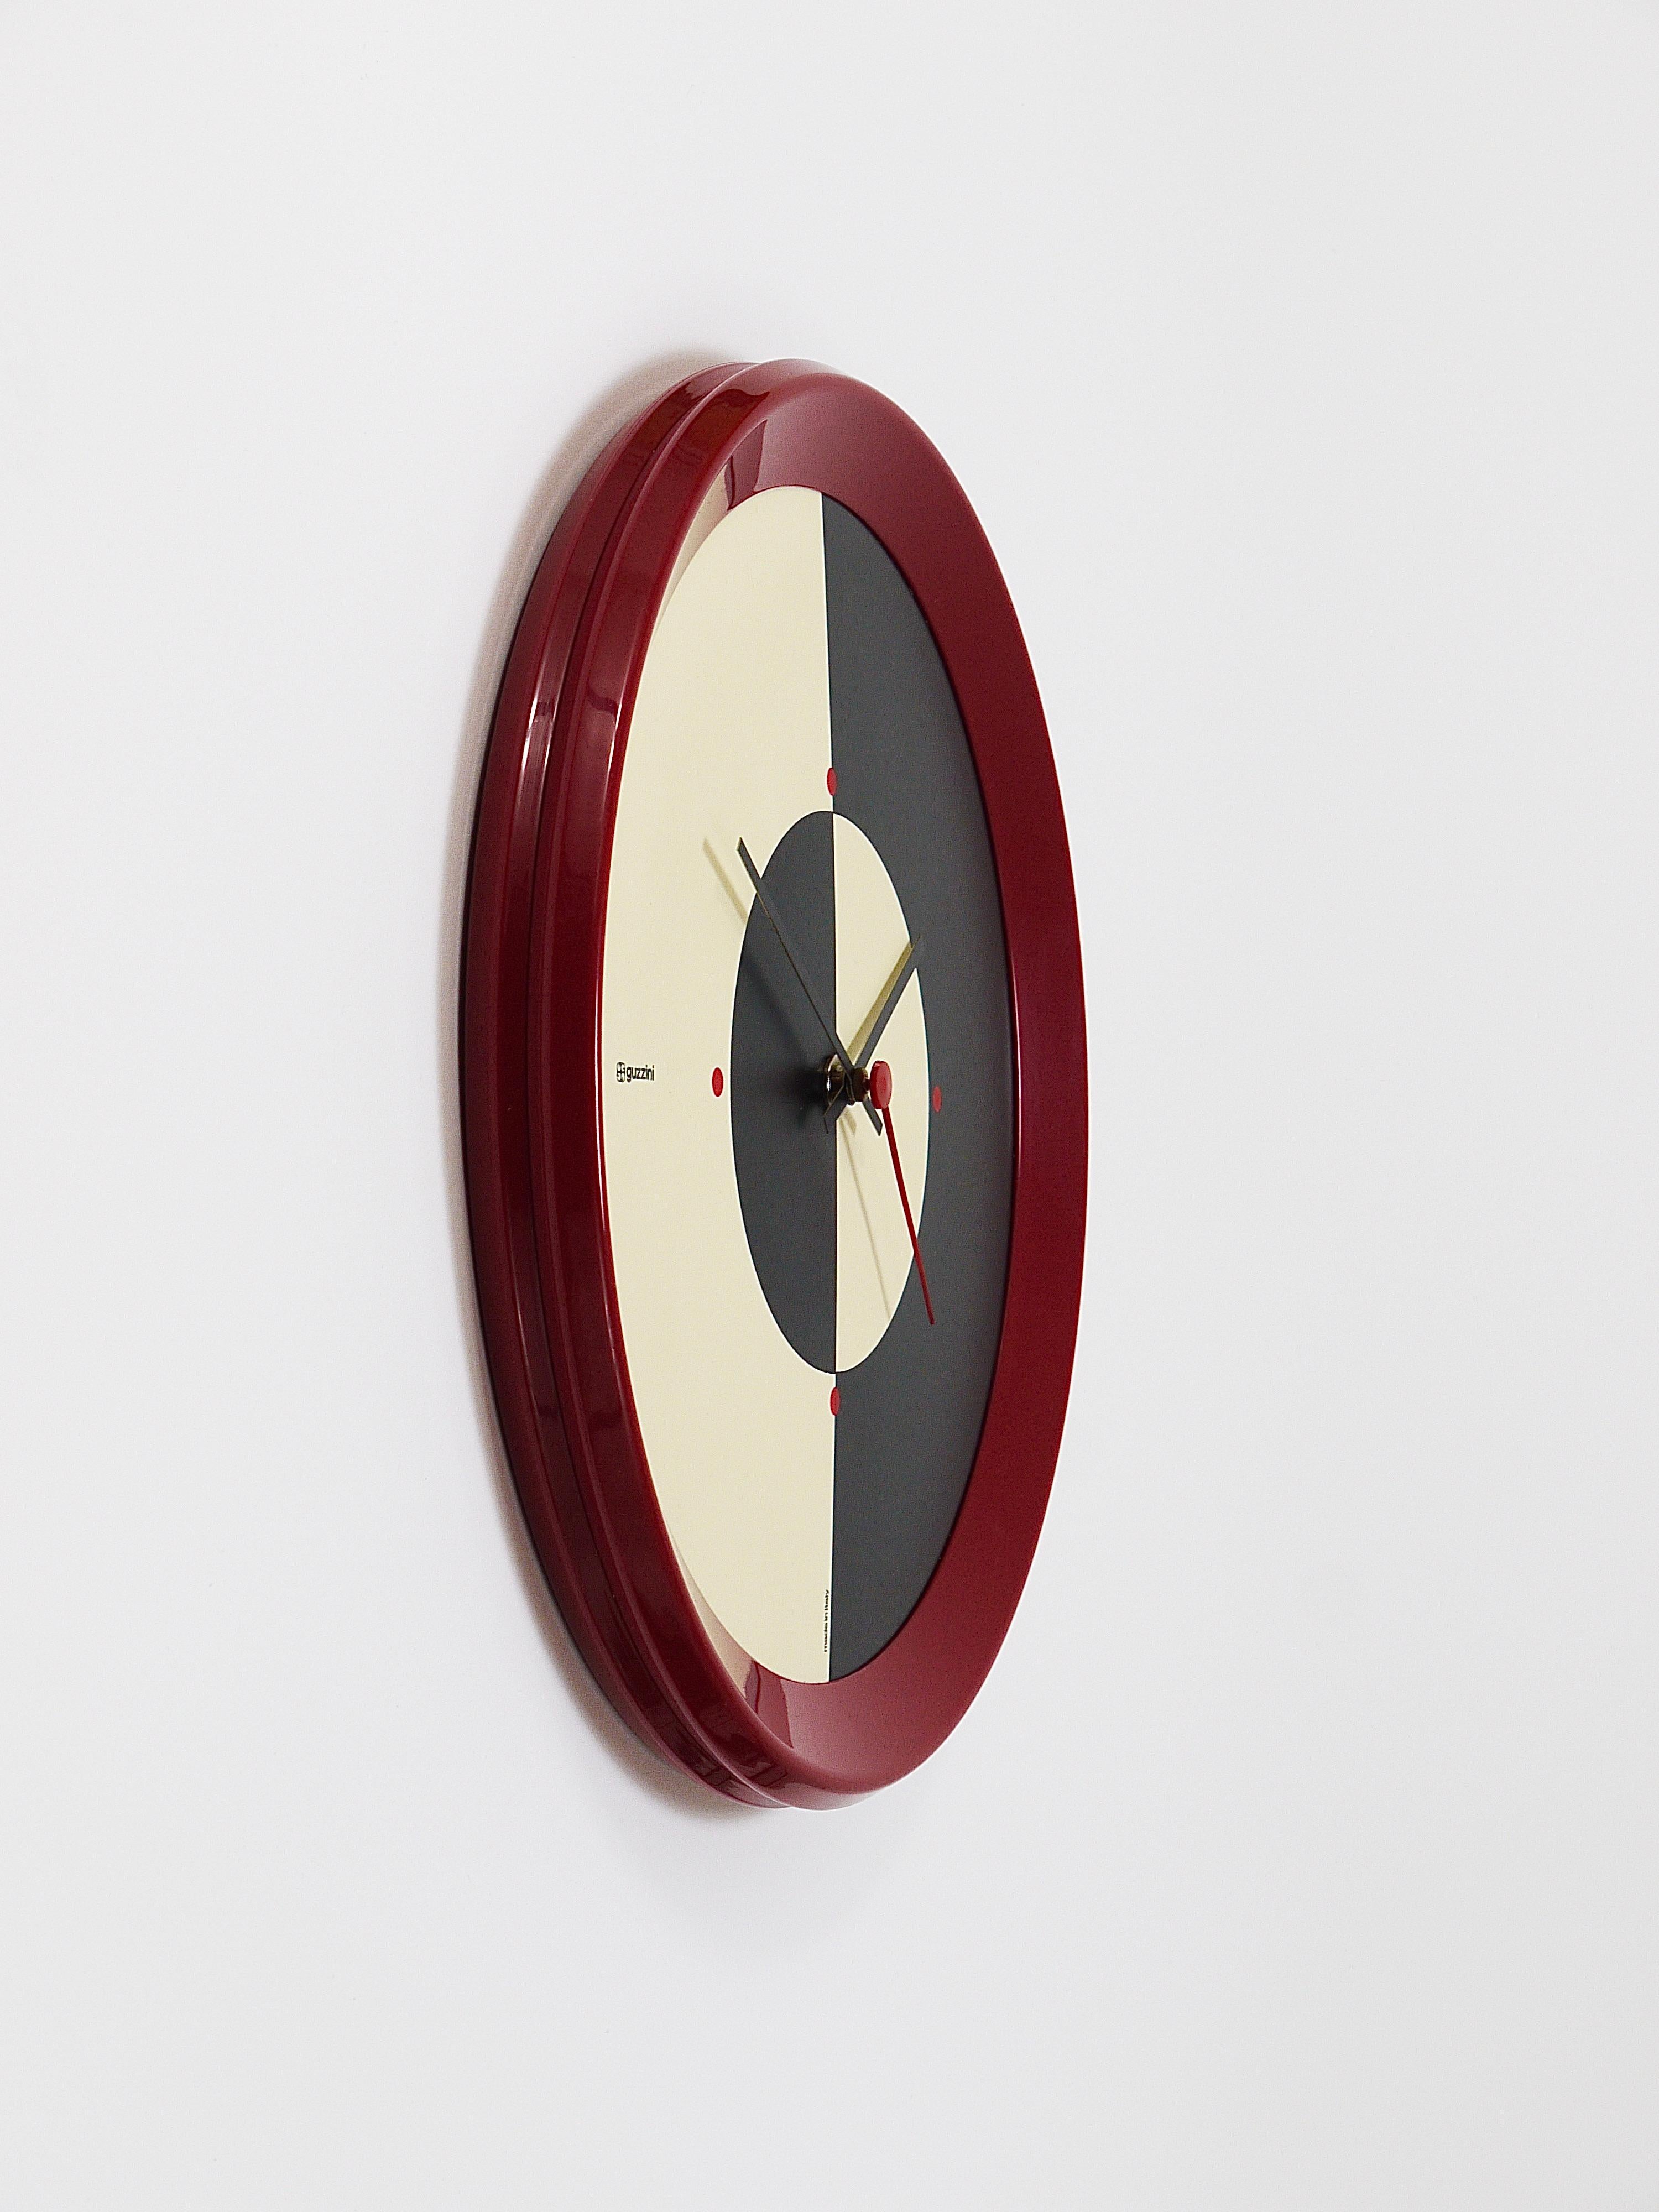 A beautiful postmodern Memphis-style wall clock from the 1980s. Designed by Bruno Gecchelin, executed by Guzzini, Italy. The housing is made of bordeaux dark red plastic, the black and white clocks face shows wonderful geometric graphics and has red